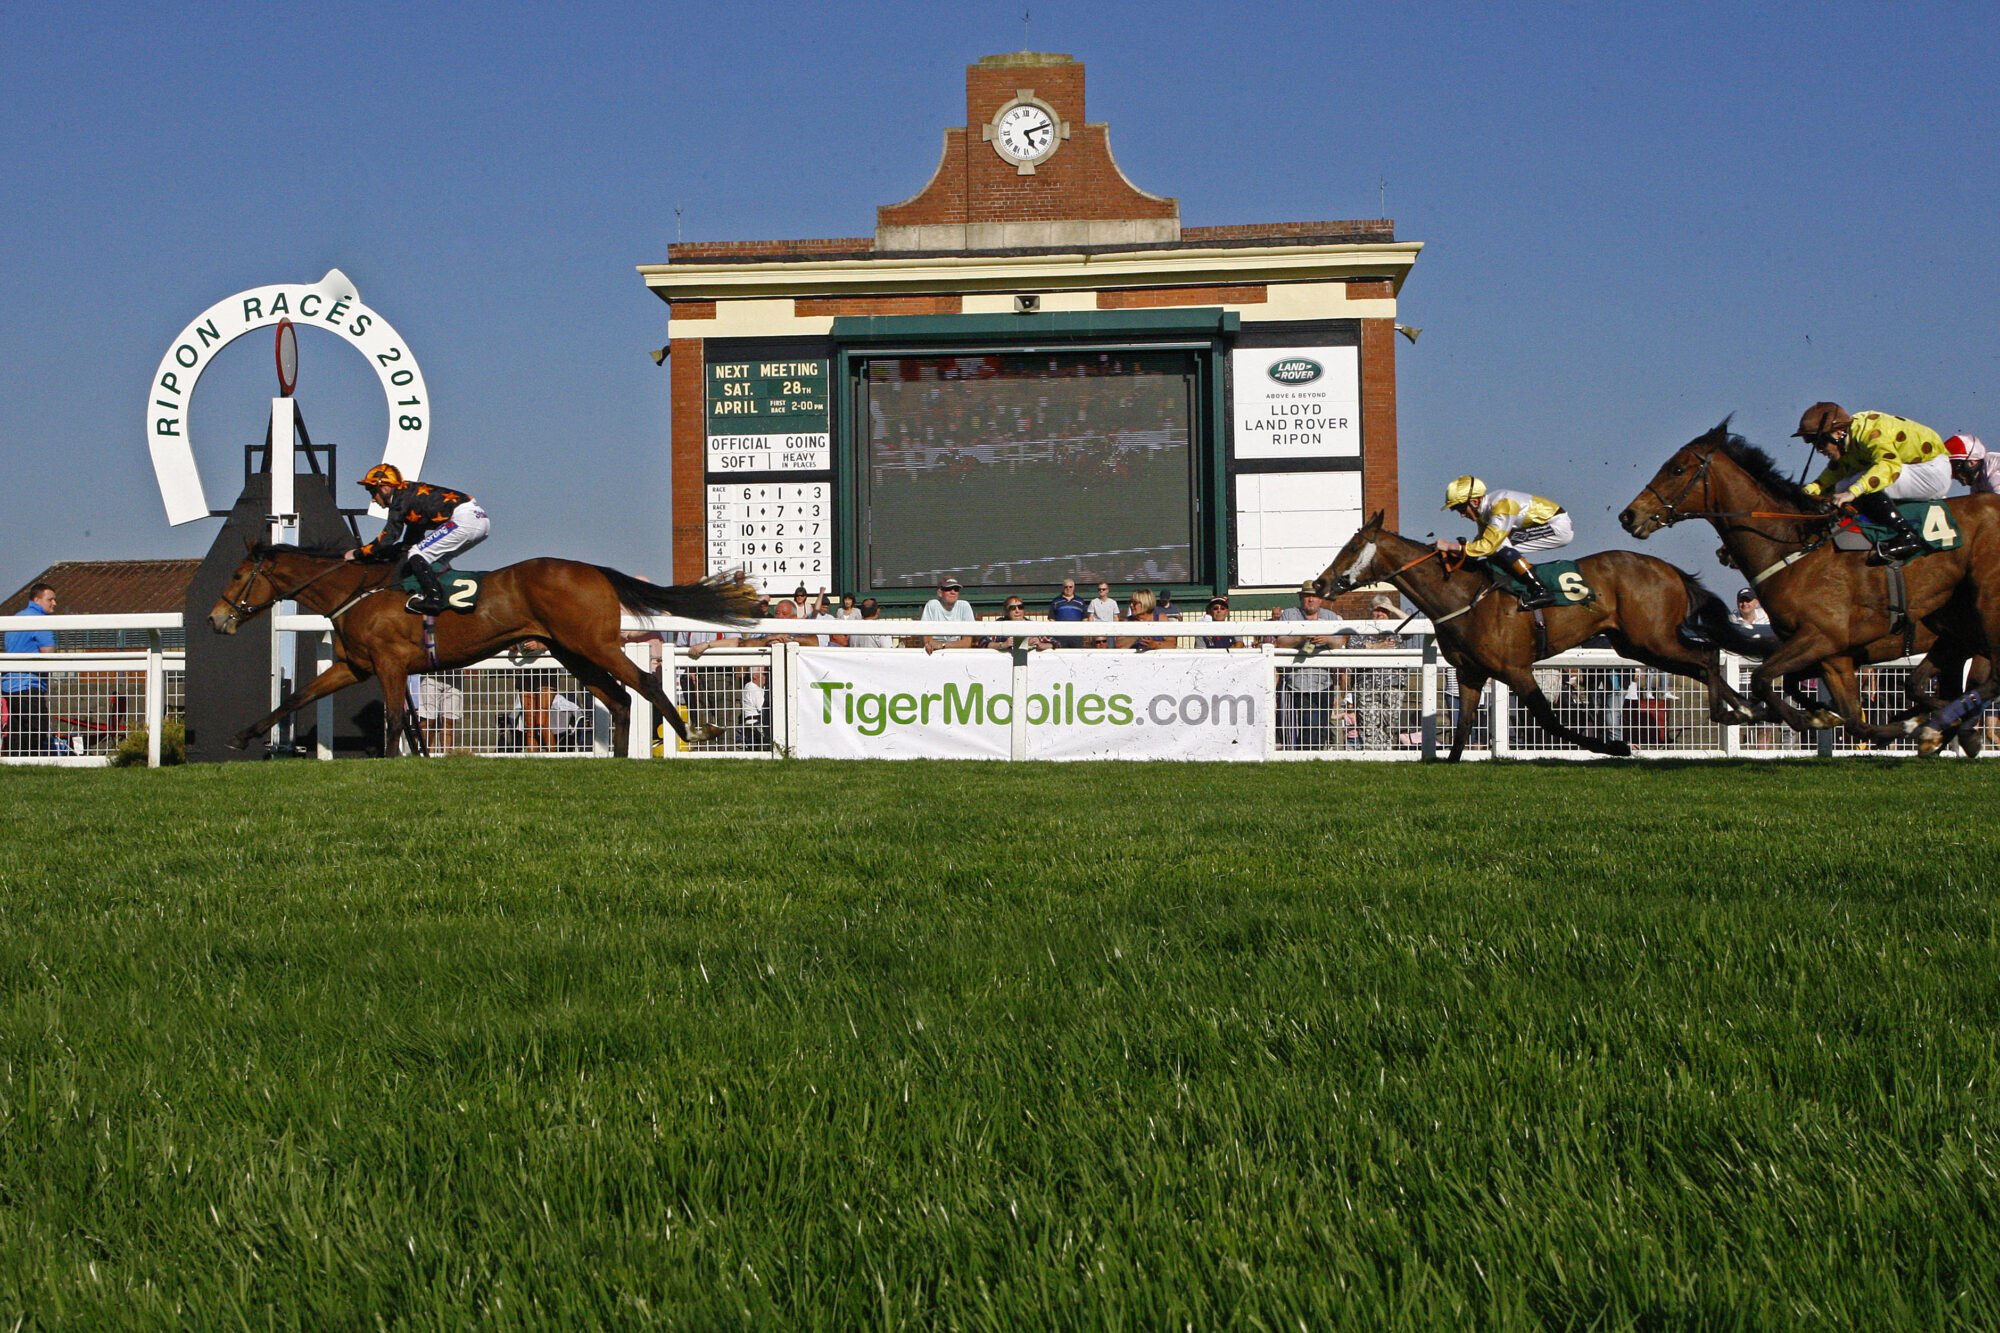 Image name go racing yorkshire horses on course ripon racecourse 2018 the 32 image from the post Ripon Flat Race at Ripon Racecourse on Saturday, August 19, 2023 in Yorkshire.com.